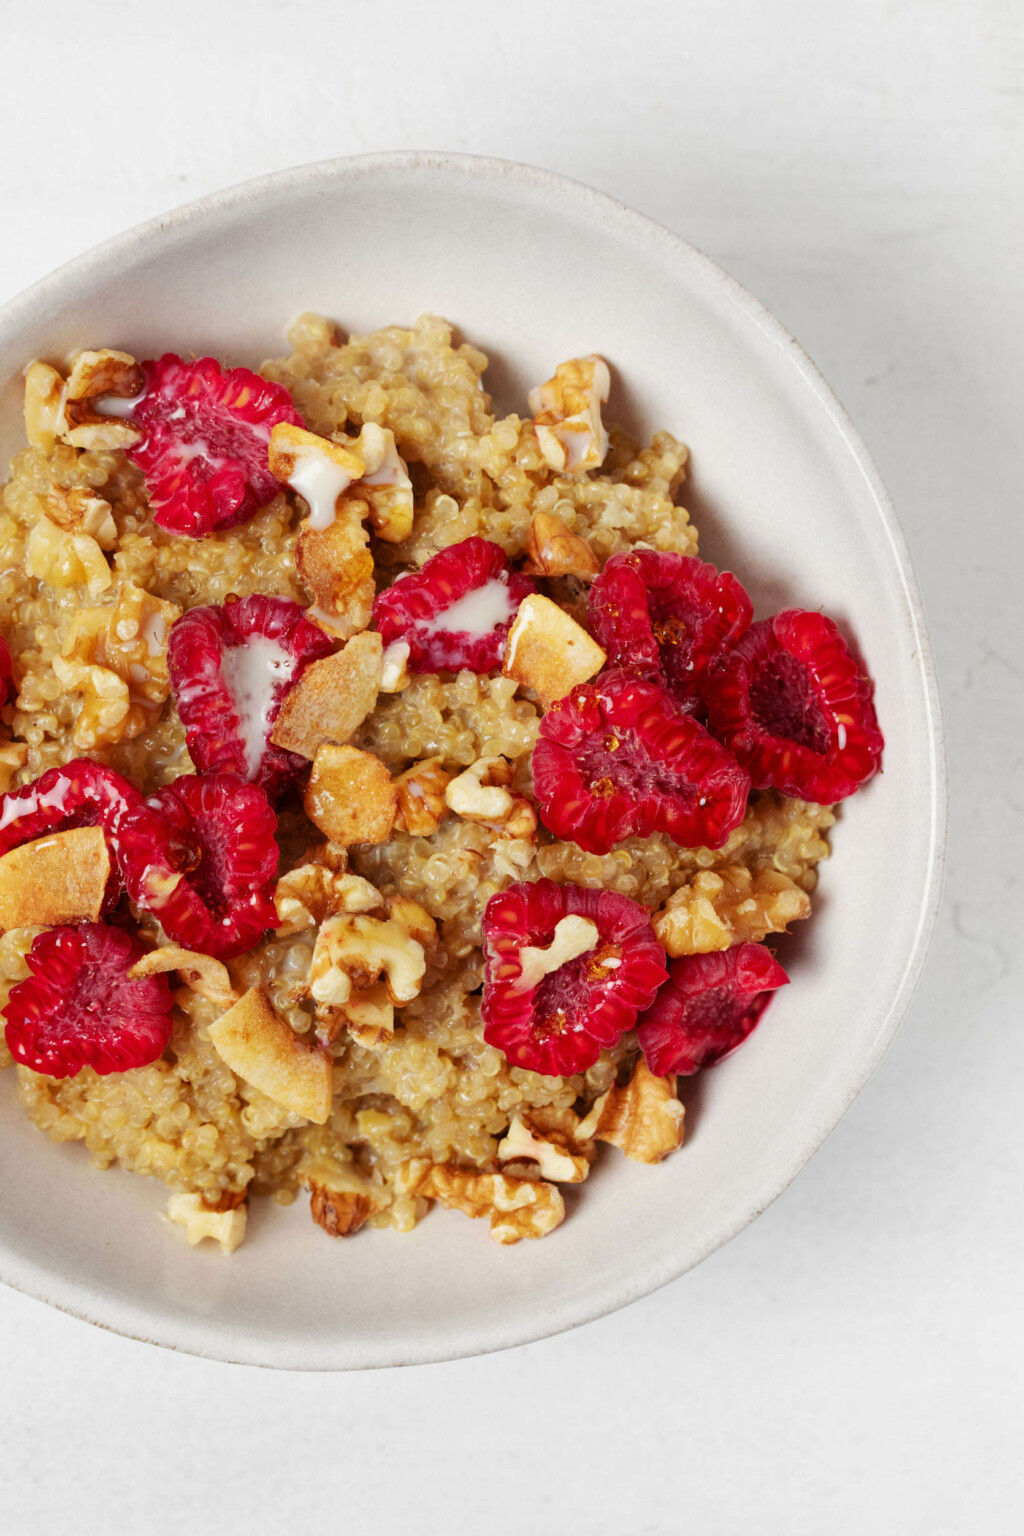 An overhead image of a quinoa porridge, which has been topped with raspberries, nuts, and coconut flakes.